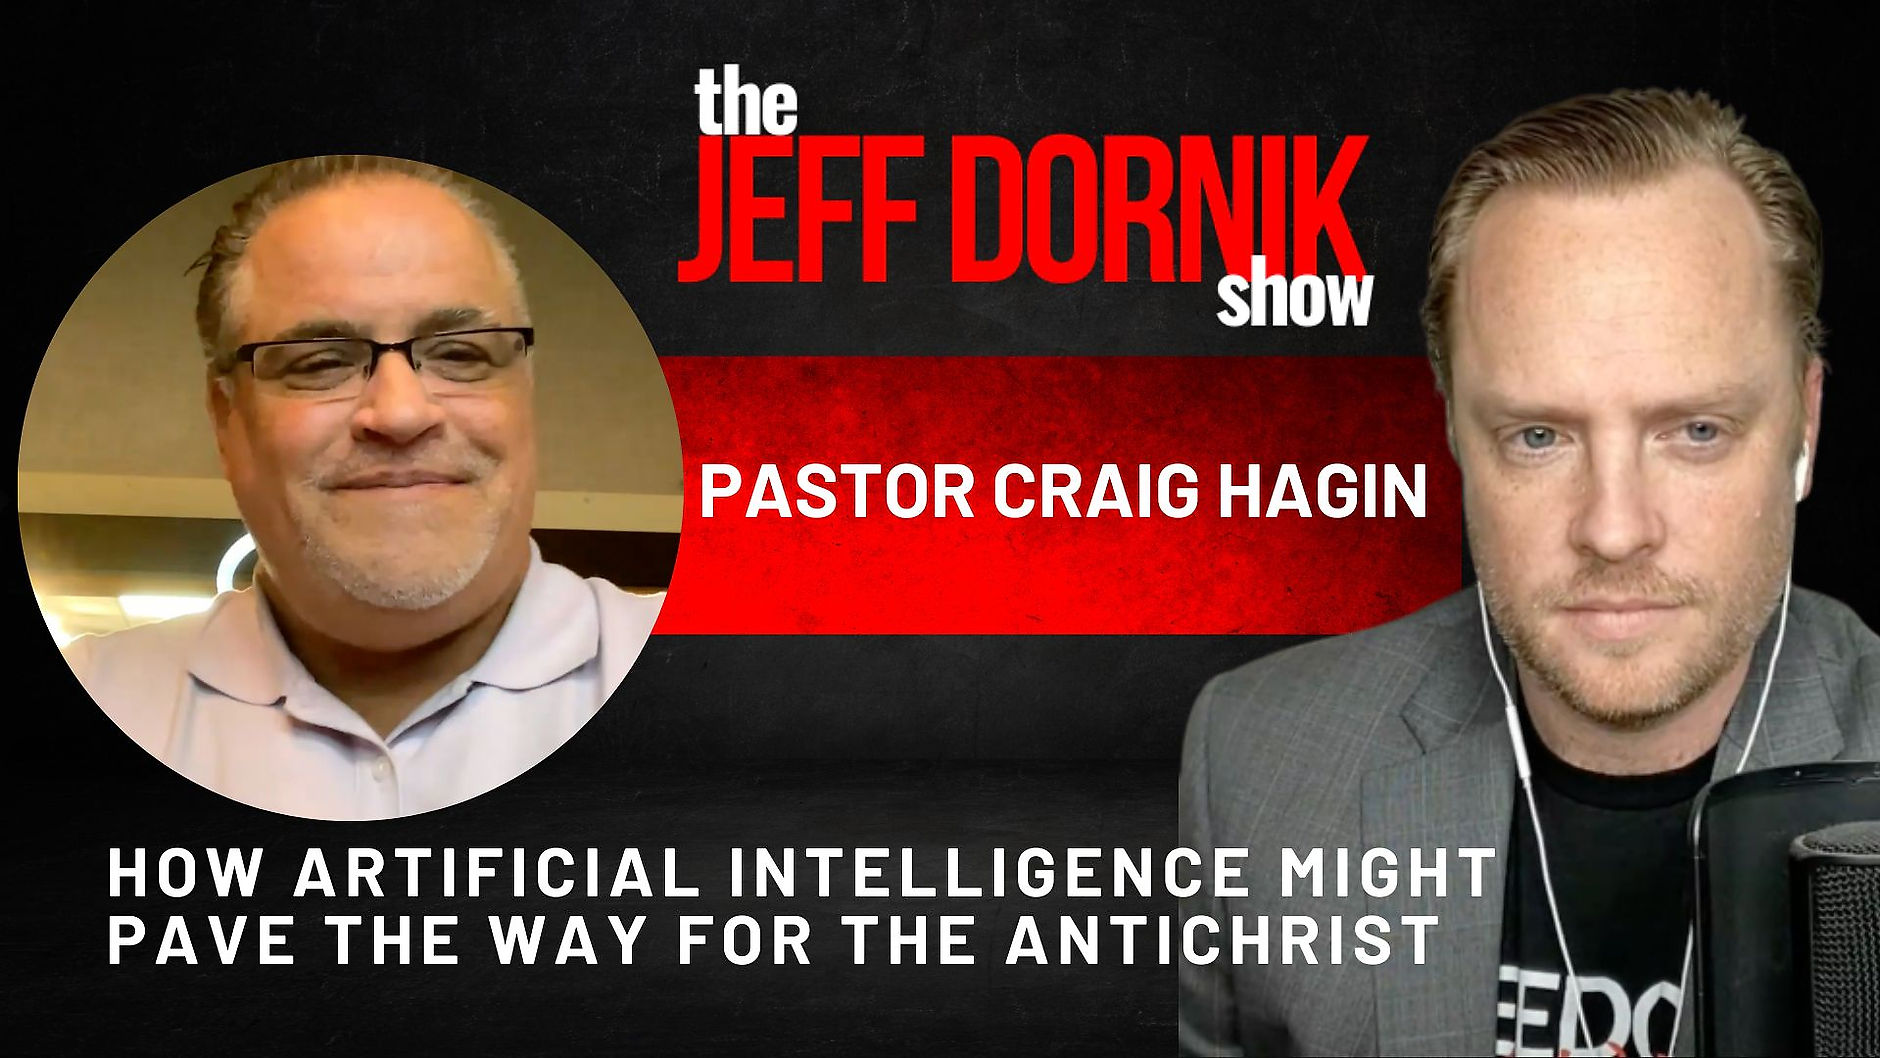 Pastor Craig Hagin on how Artificial Intelligence Might Pave the Way for the Antichrist